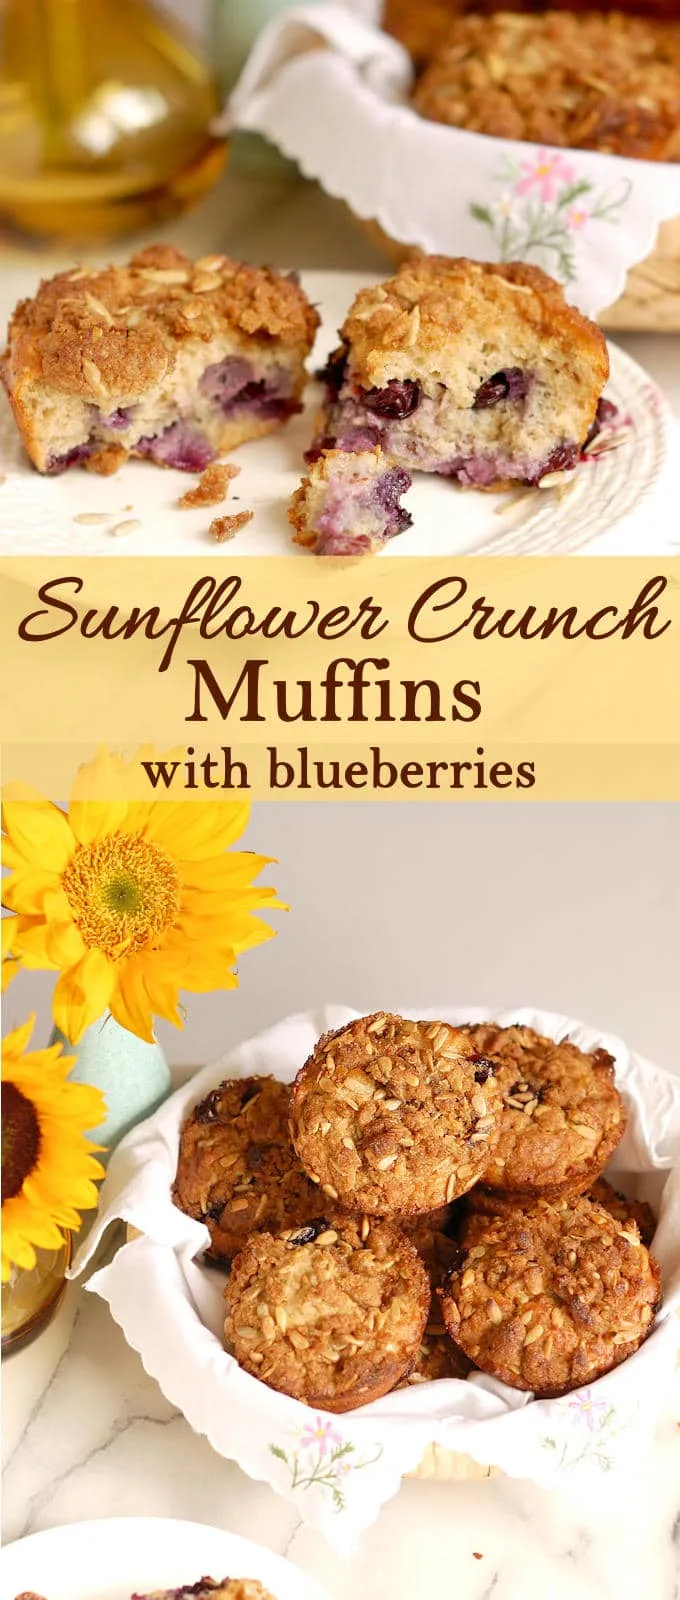 Have you ever baked with sunflower flour? Try it! Sunflower Crumb Muffins are moist and flavorful. Sunflower flour adds richness and great flavor to these yummy bites. #Breadbakers